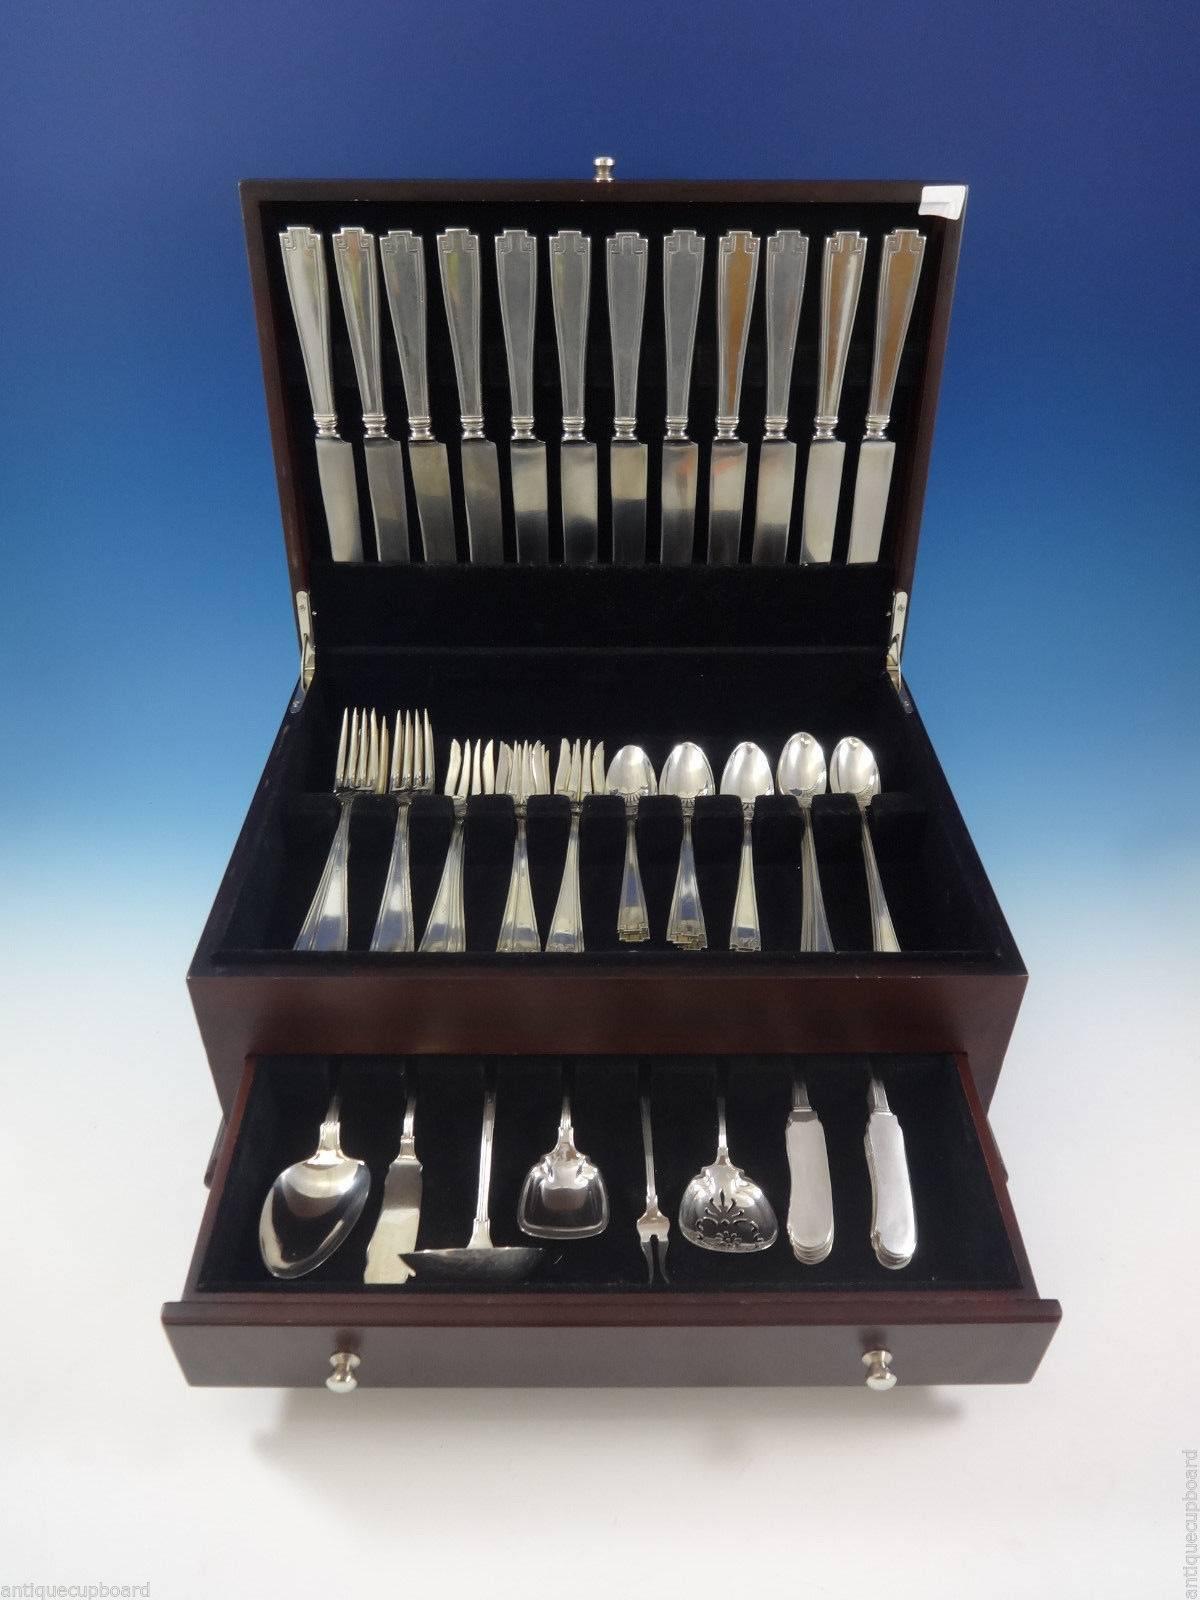 Etruscan by Gorham sterling silver dinner size flatware set of 78 pieces. This set includes: 

12 dinner size knives, 9 1/2